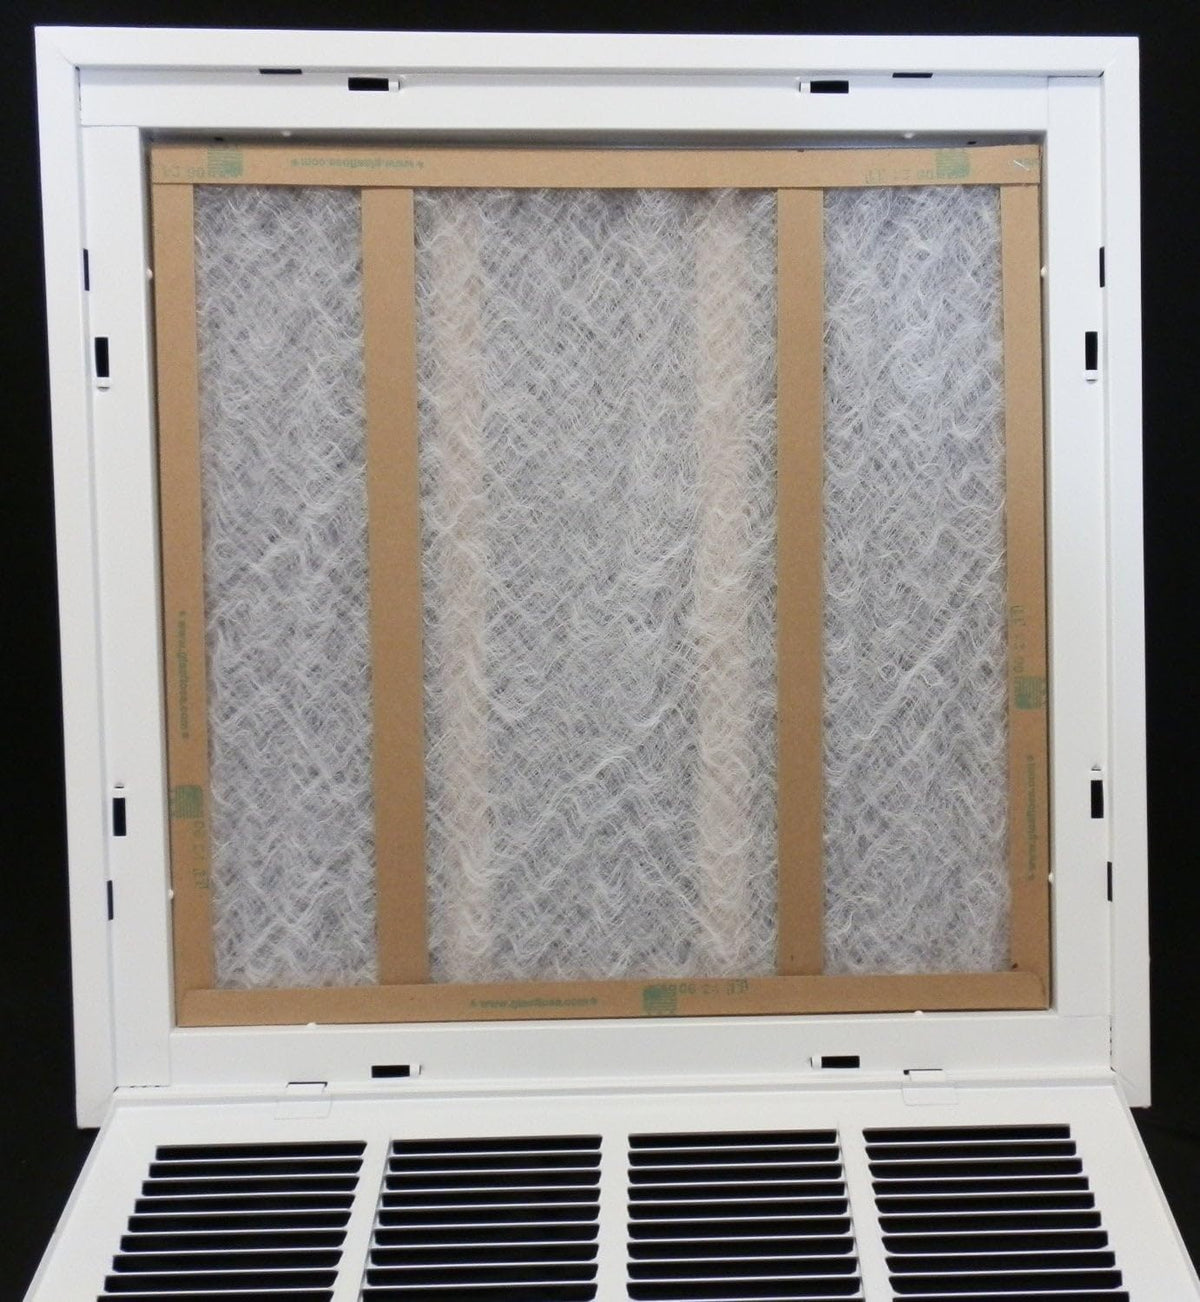 26&quot; X 10&quot; Steel Return Air Filter Grille for 1&quot; Filter - Removable Frame - [Outer Dimensions: 28 5/8&quot; X 12 5/8&quot;]